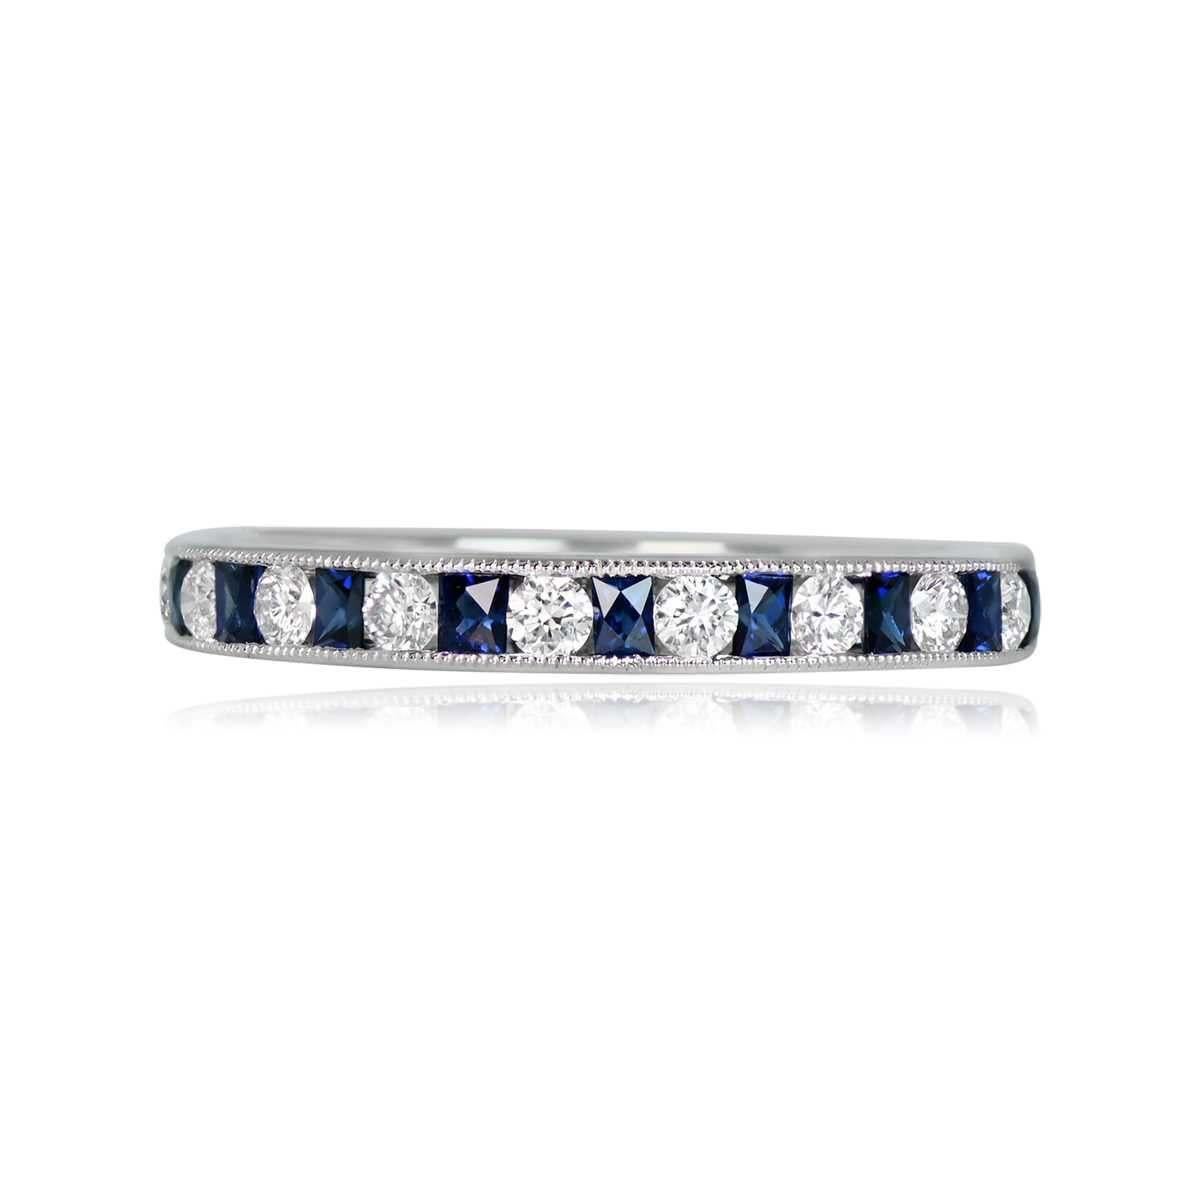 An exquisite half-eternity band crafted in platinum, featuring natural French-cut sapphires and round brilliant cut diamonds in an artful channel setting adorned with delicate milgrain detailing. The diamonds have a total carat weight of 0.27